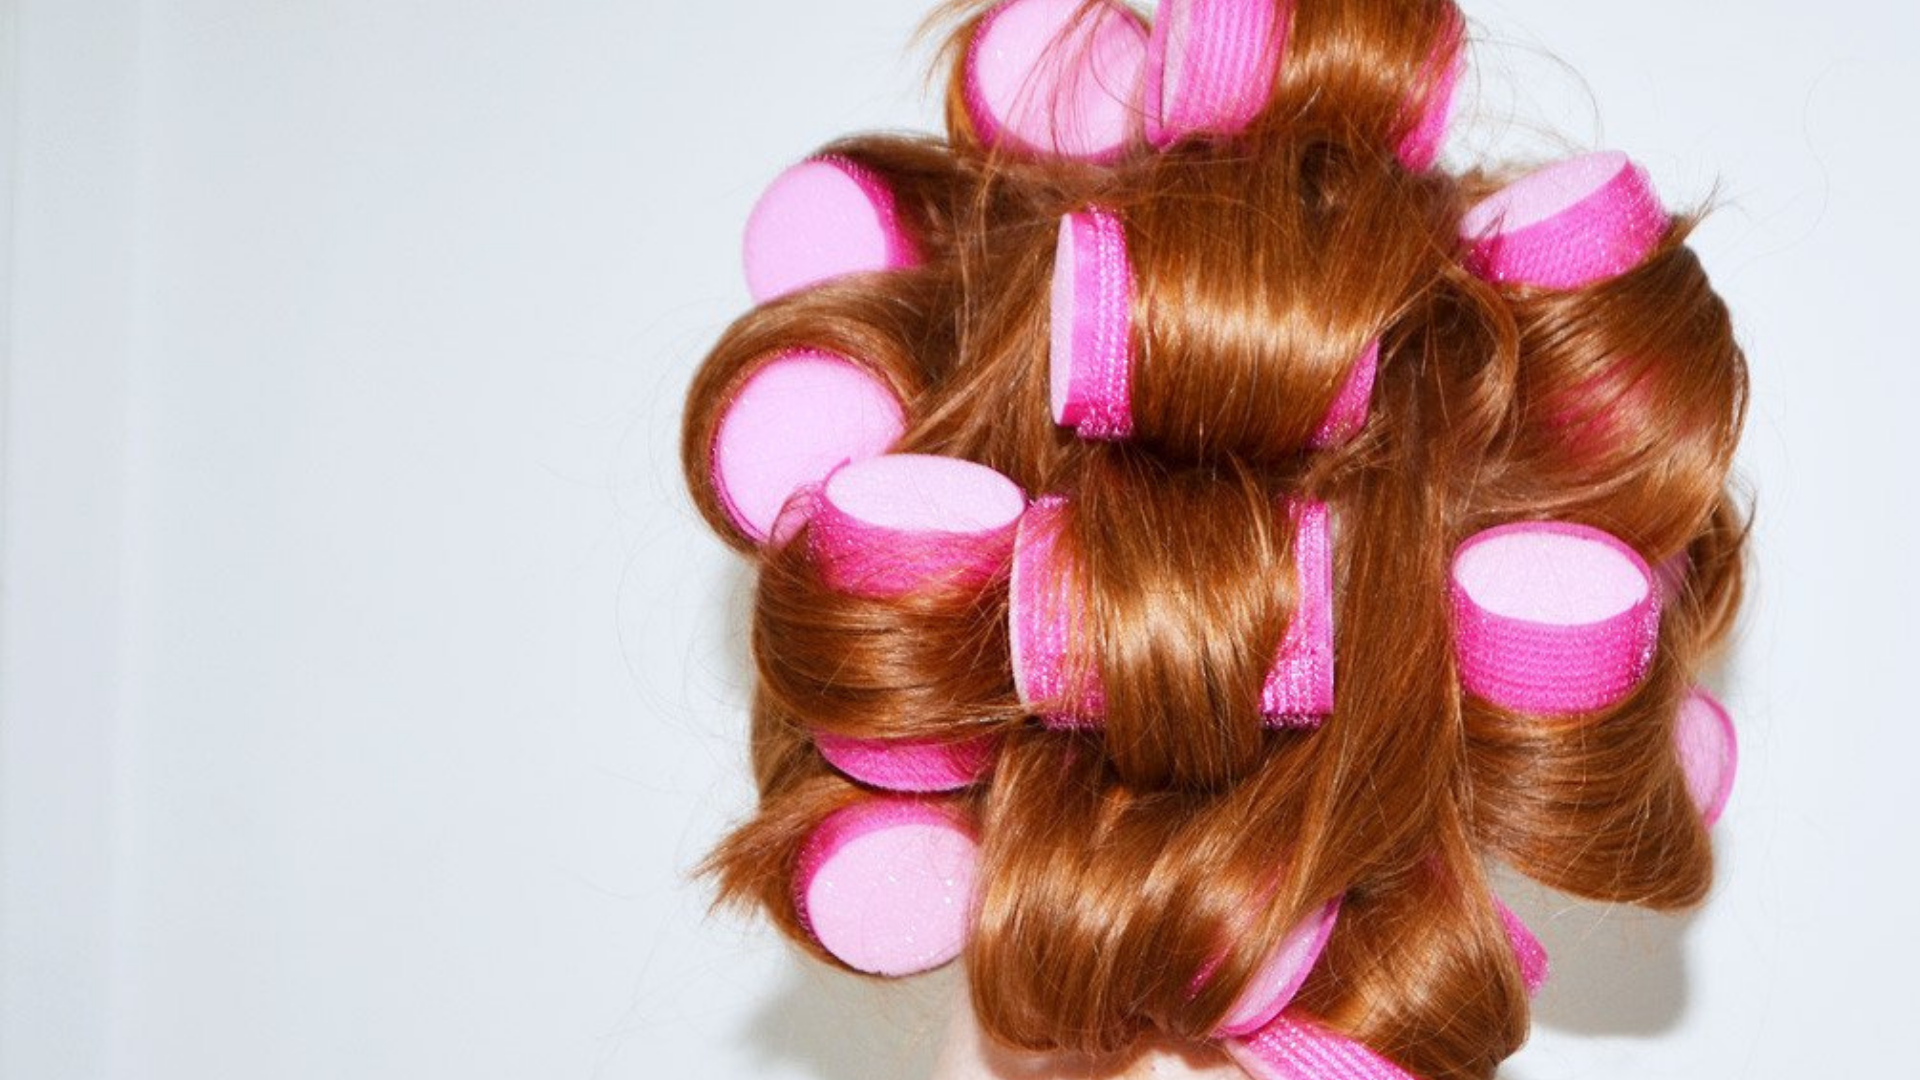 How to Use Velcro Rollers Without Damaging Your Red Tresses